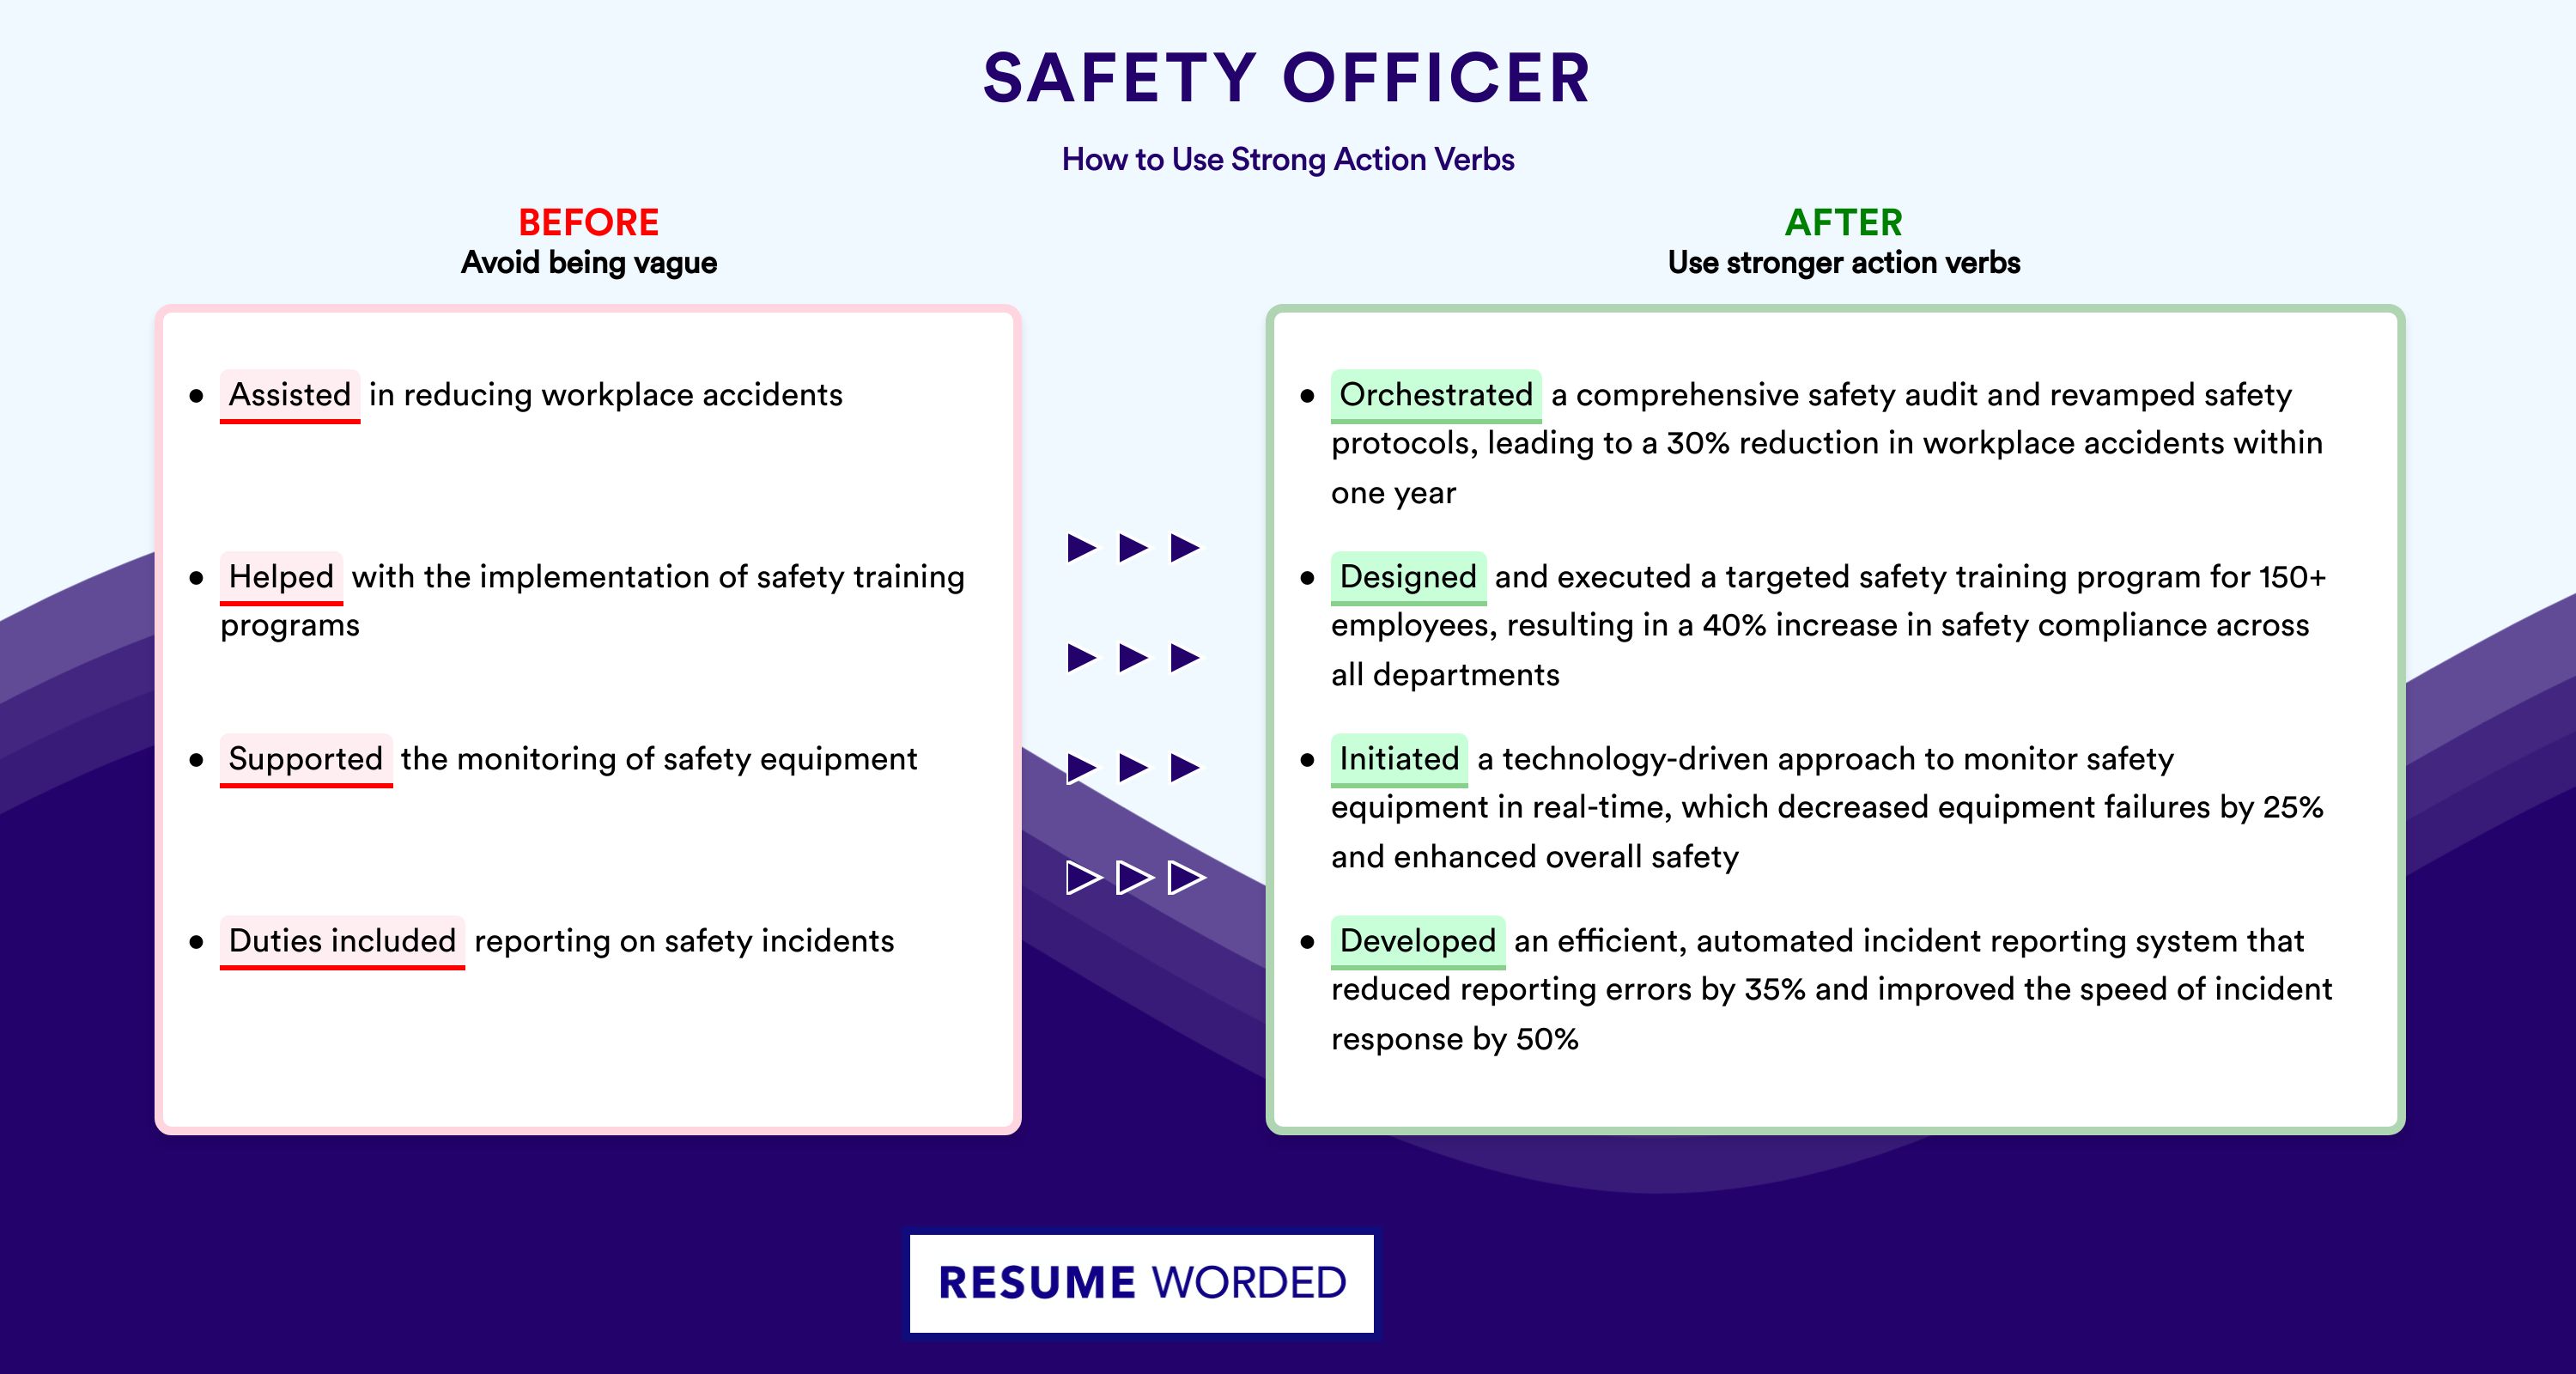 Action Verbs for Safety Officer